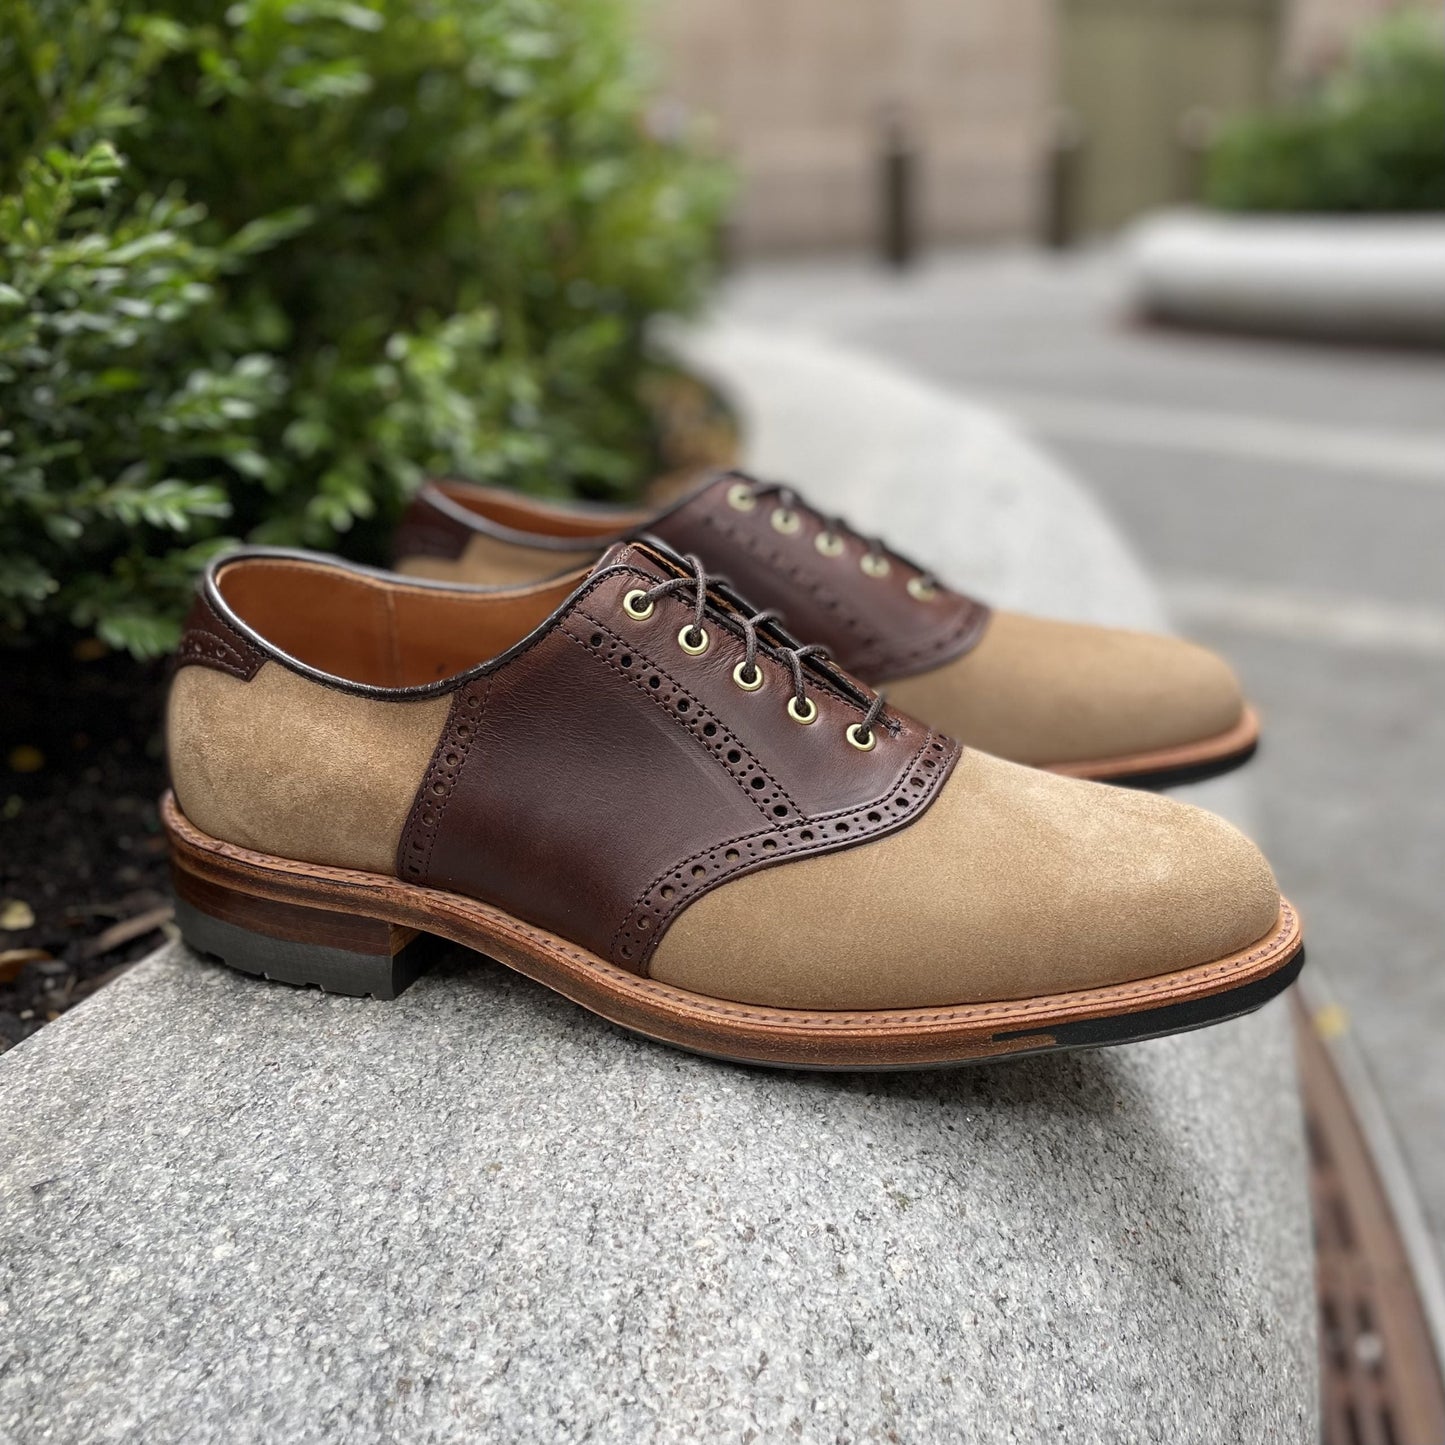 D1304C - Valhalla Saddle Oxford in CXL and Tan Suede